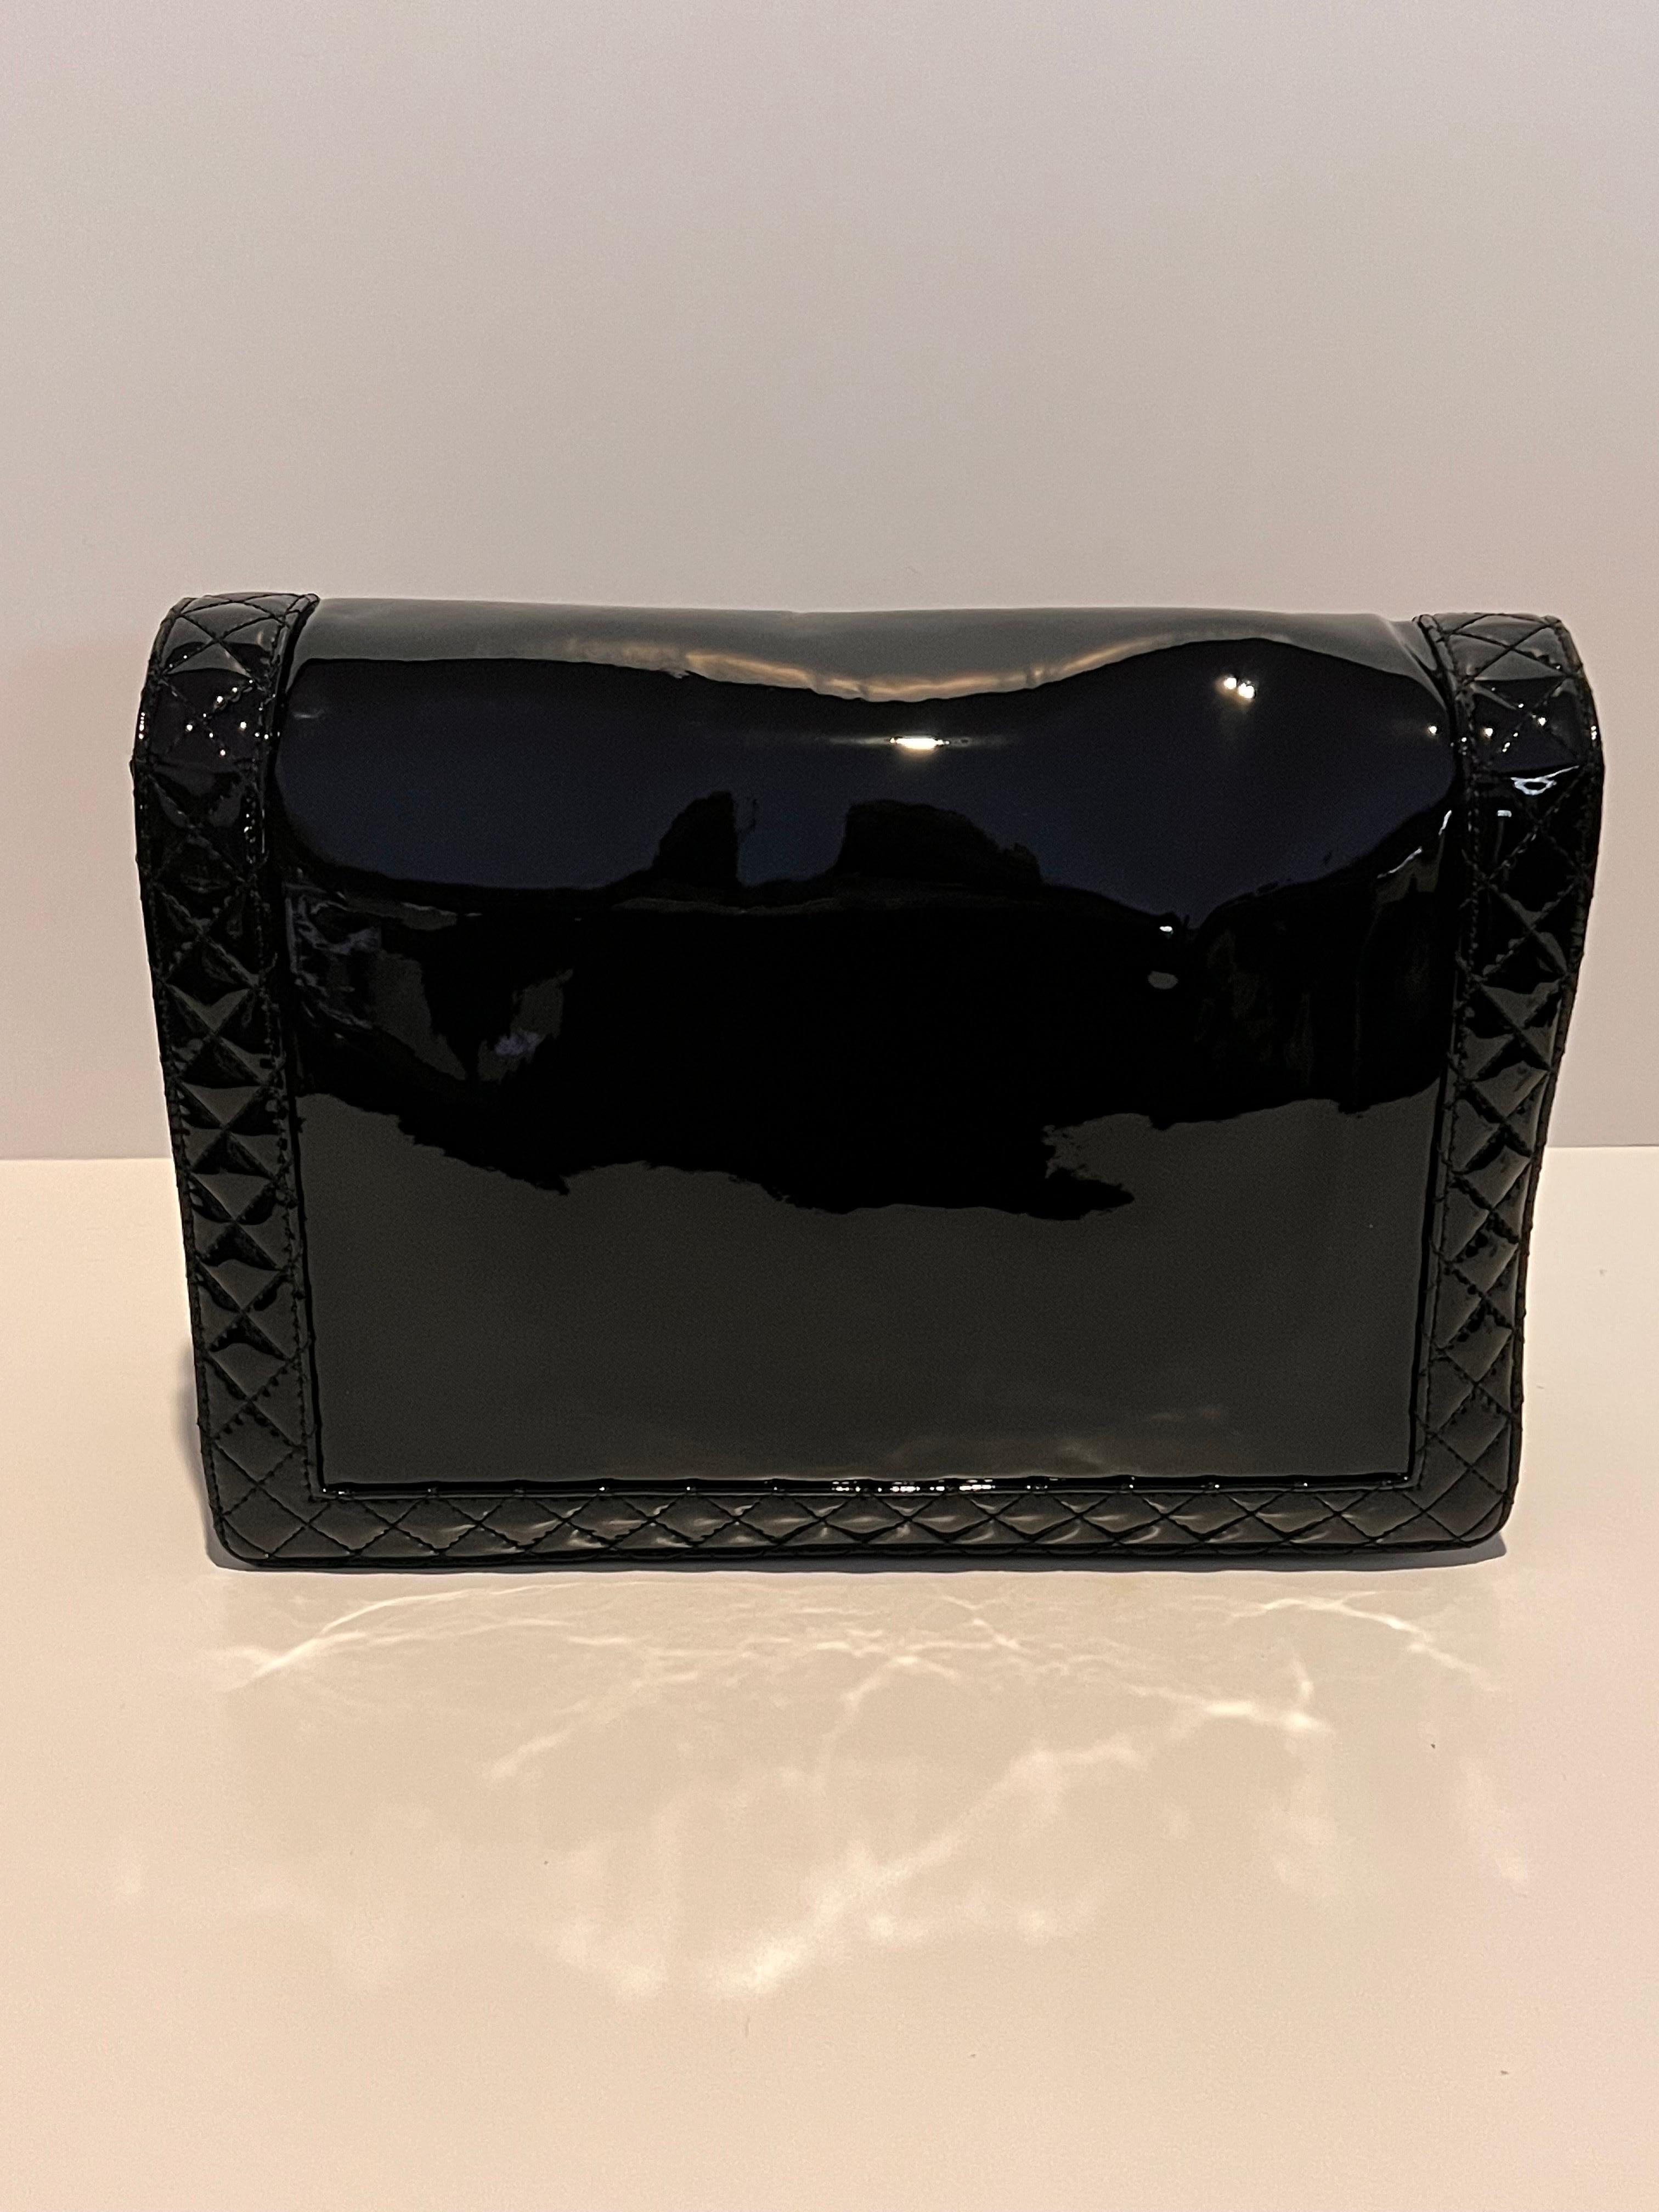 Chanel Extra Large Patent Boy Bag never used, new in the box! Mint condition. 

This stunning Chanel Boy bag is inspired by Coco Chanel's first lover. Crafted from patent leather and features silver hardware. Finished with the signature double C